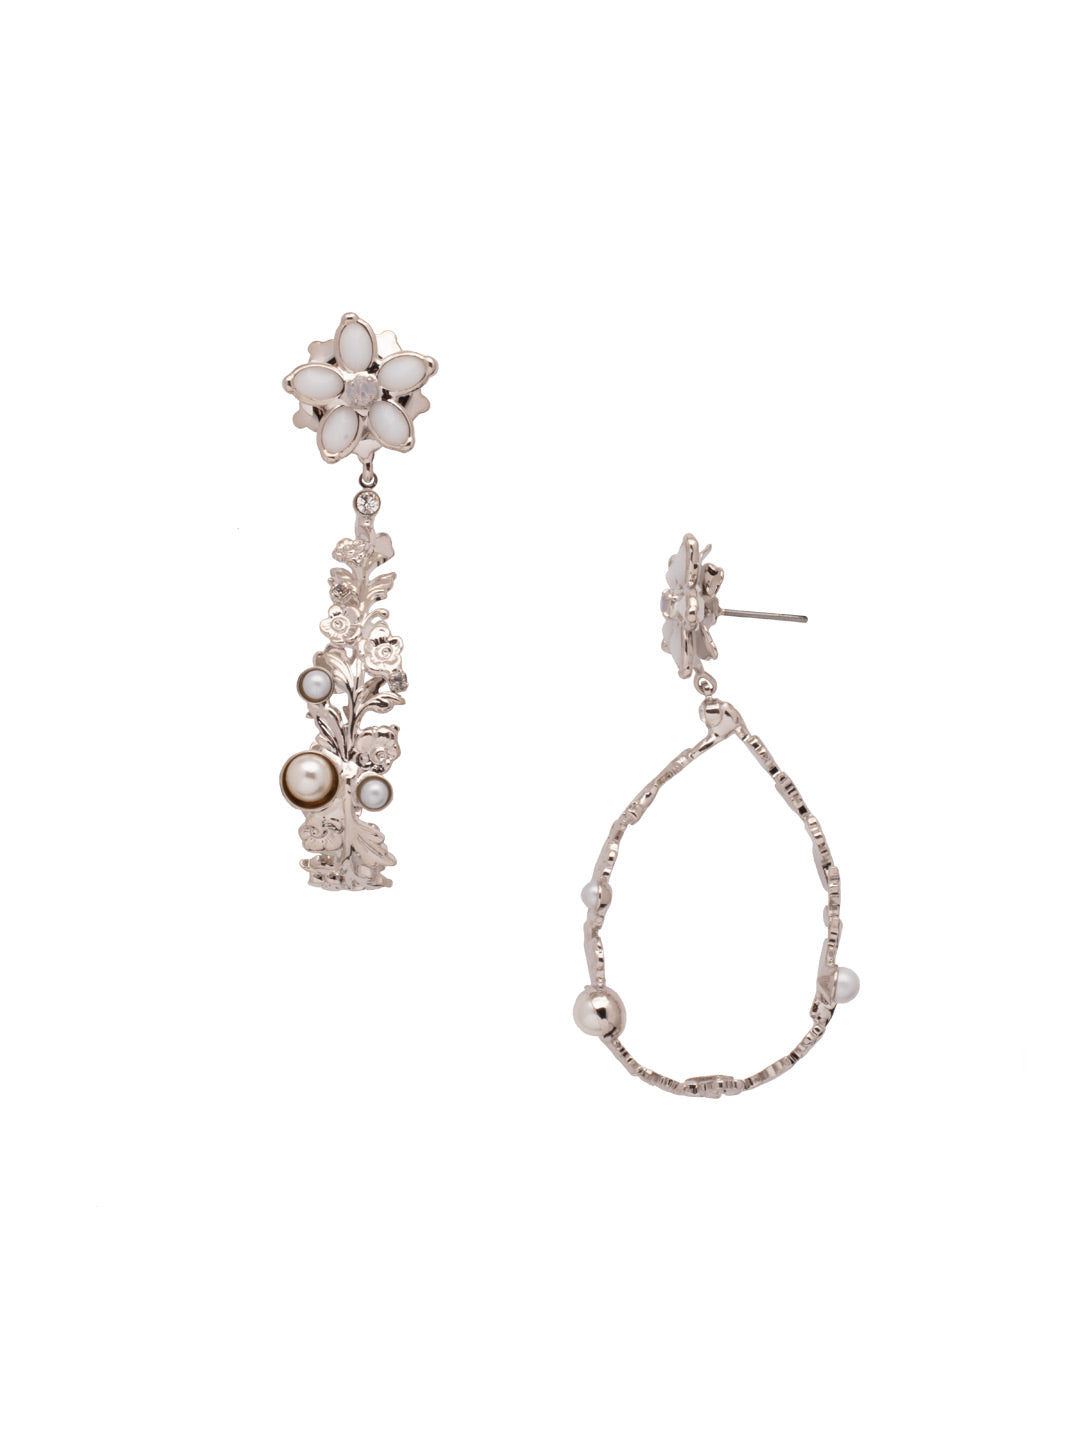 Whimsy Dangle Earring - EET92RHMDP - <p>The Whimsy Dangle Earrings feature a pearl and floral embellished drop hoop dangling from a metal flower on a post. From Sorrelli's Modern Pearl collection in our Palladium Silver-tone finish.</p>